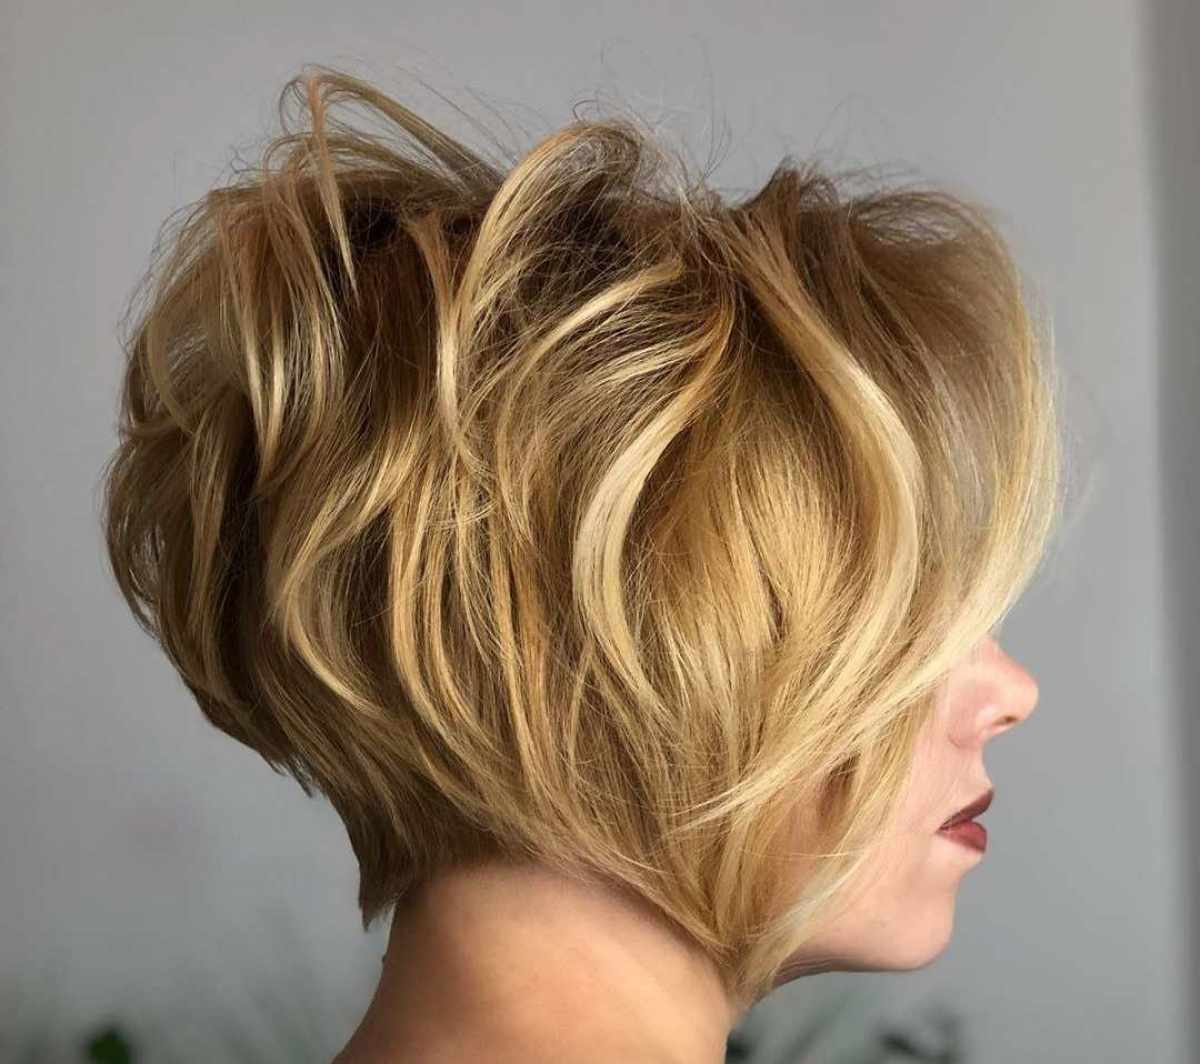 Short layered hairstyles: Find inspiration and learn how to easily style  your short hair!